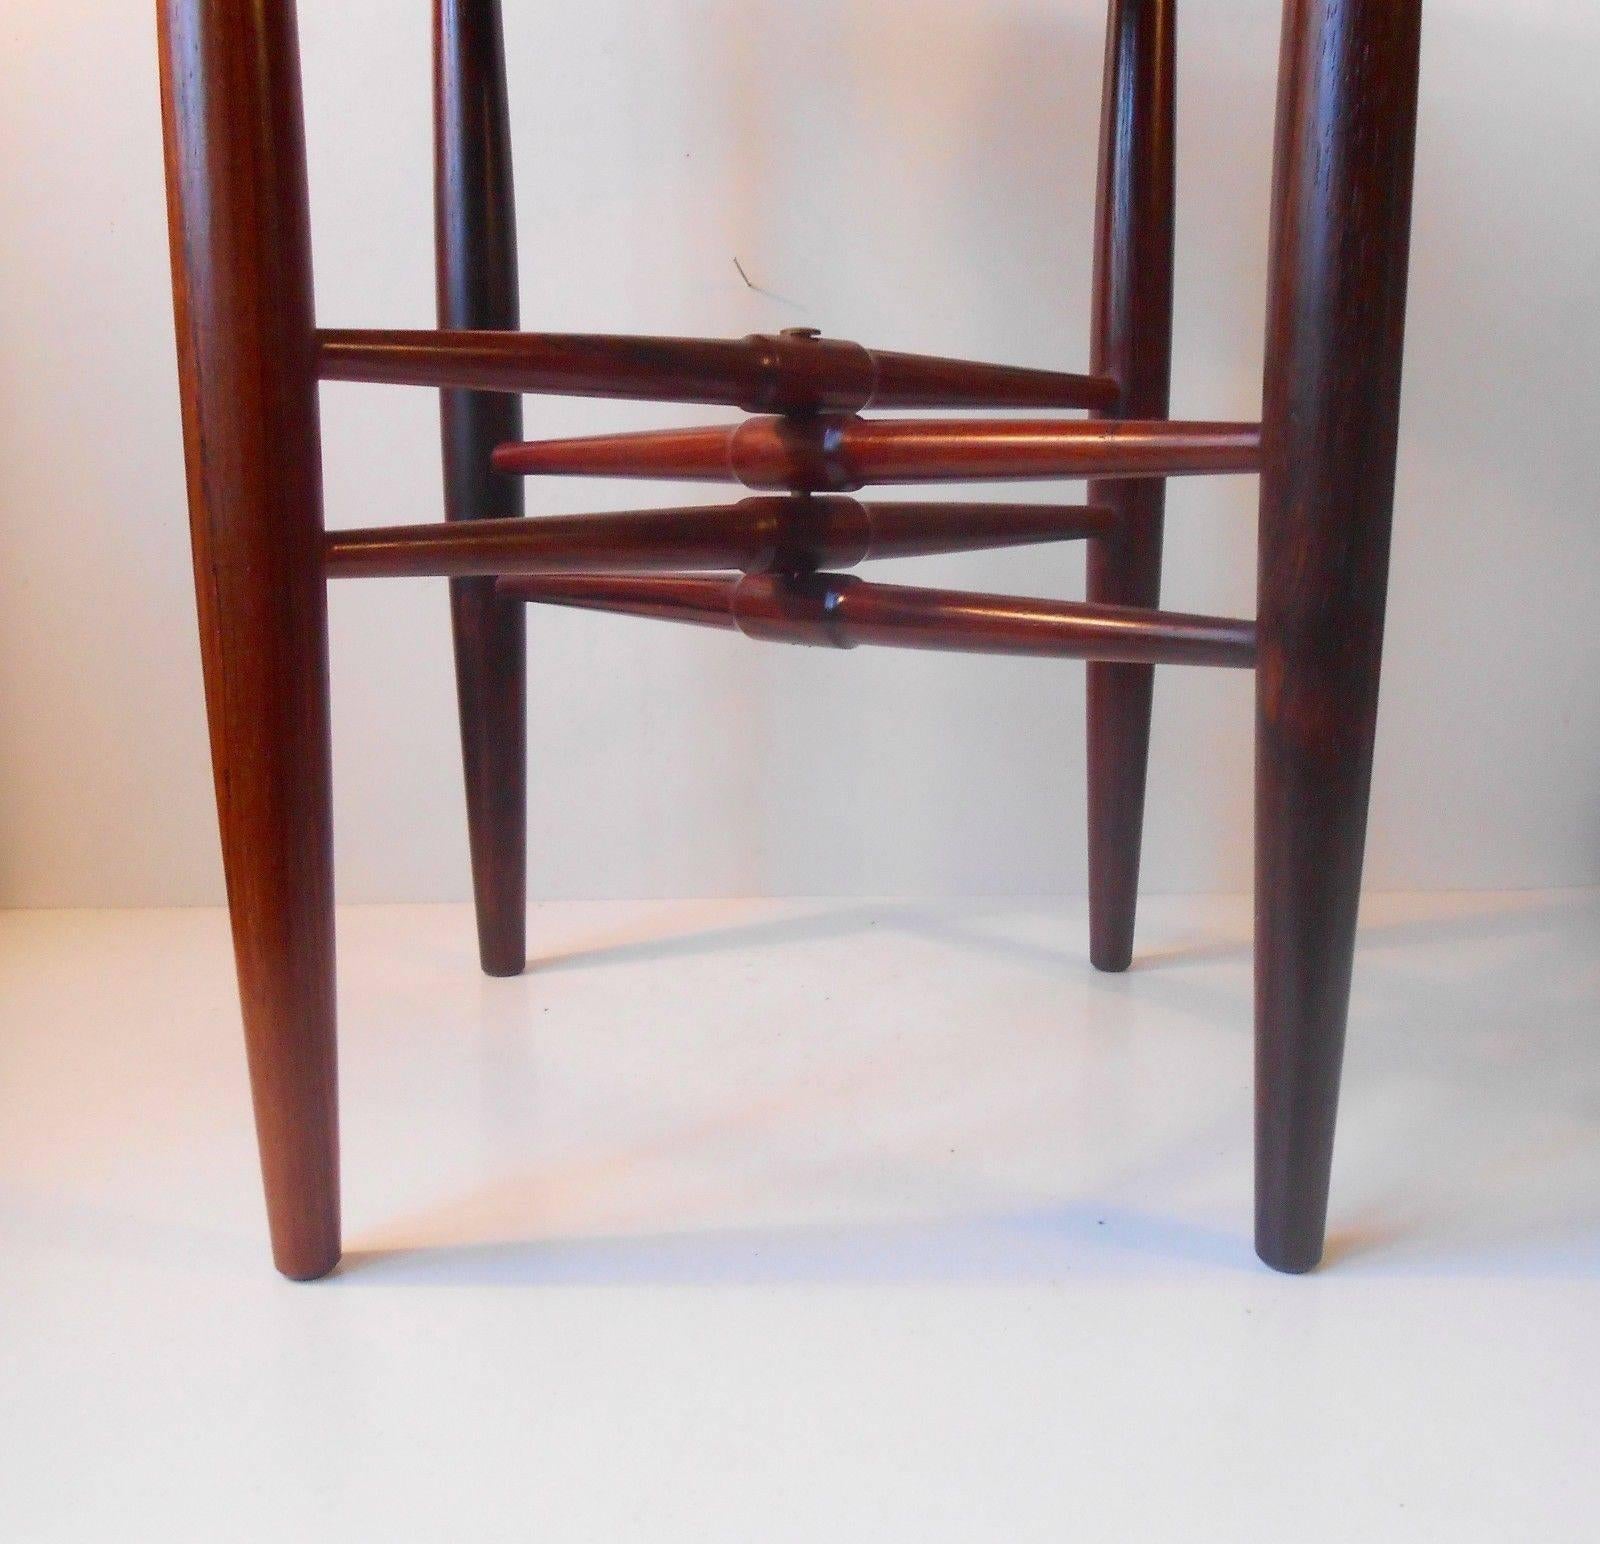 Mid-Century Modern 1960s Rosewood Side Brass Tray Table, Danish Modern by Poul Hundevad